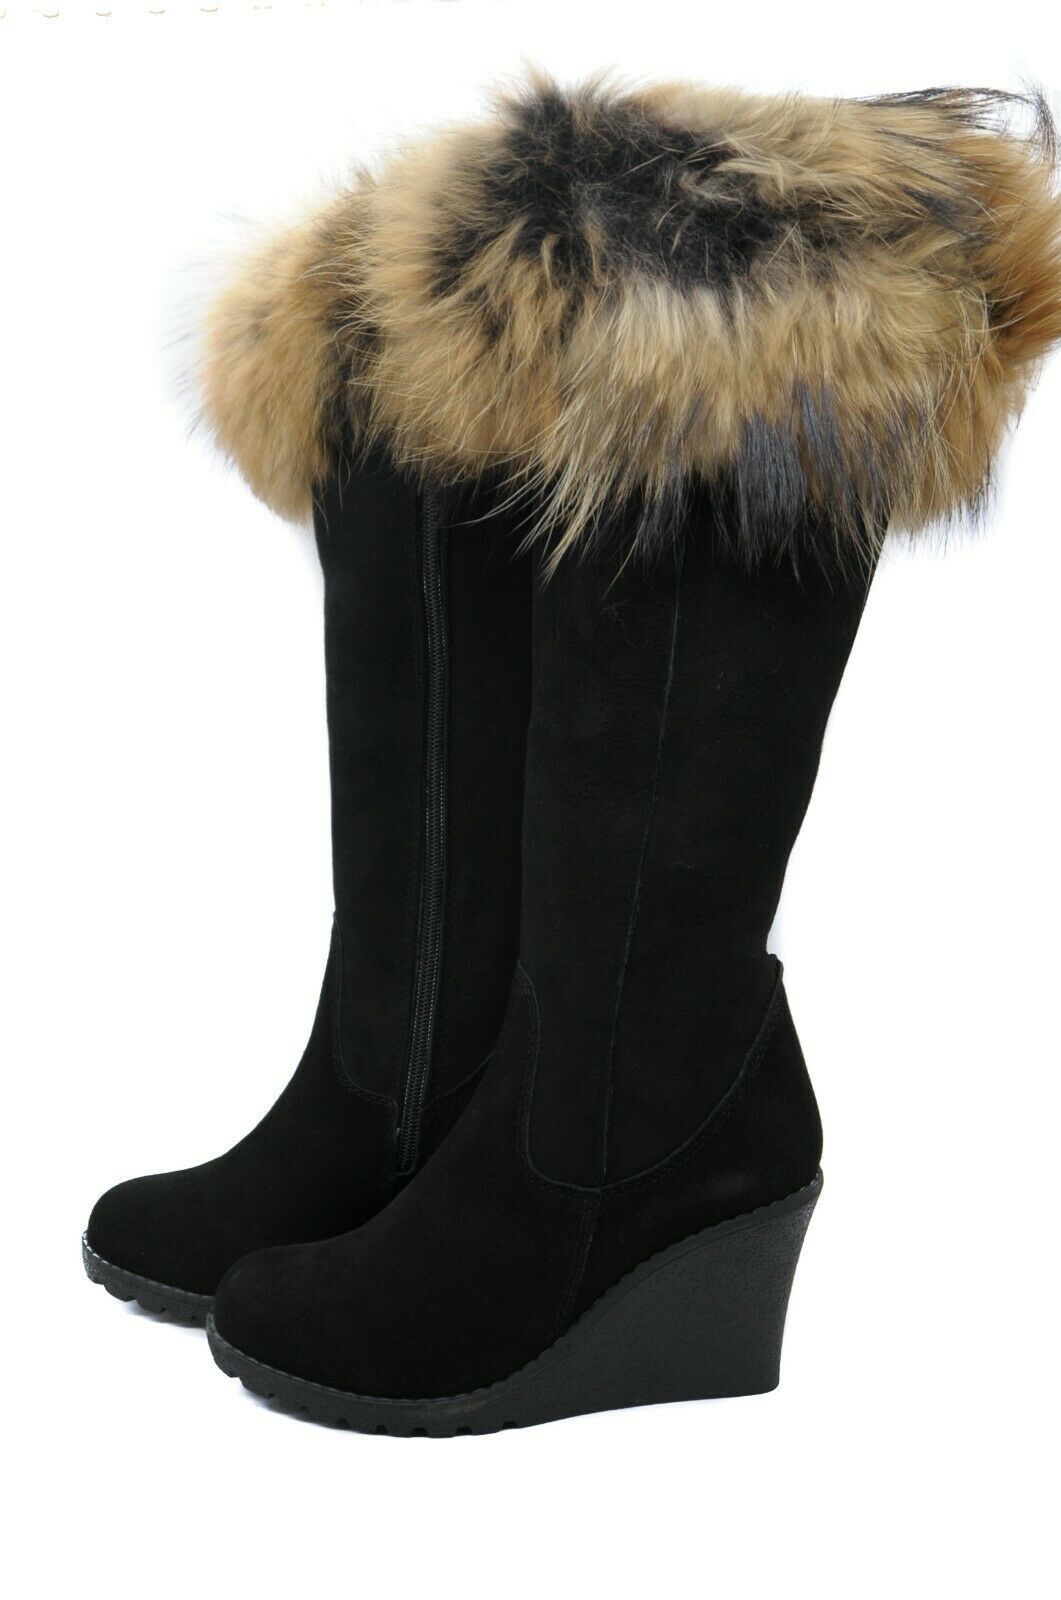 Pegia Suede Black Knee High Boots Fully Lined with a Soft Fur Trim and ...